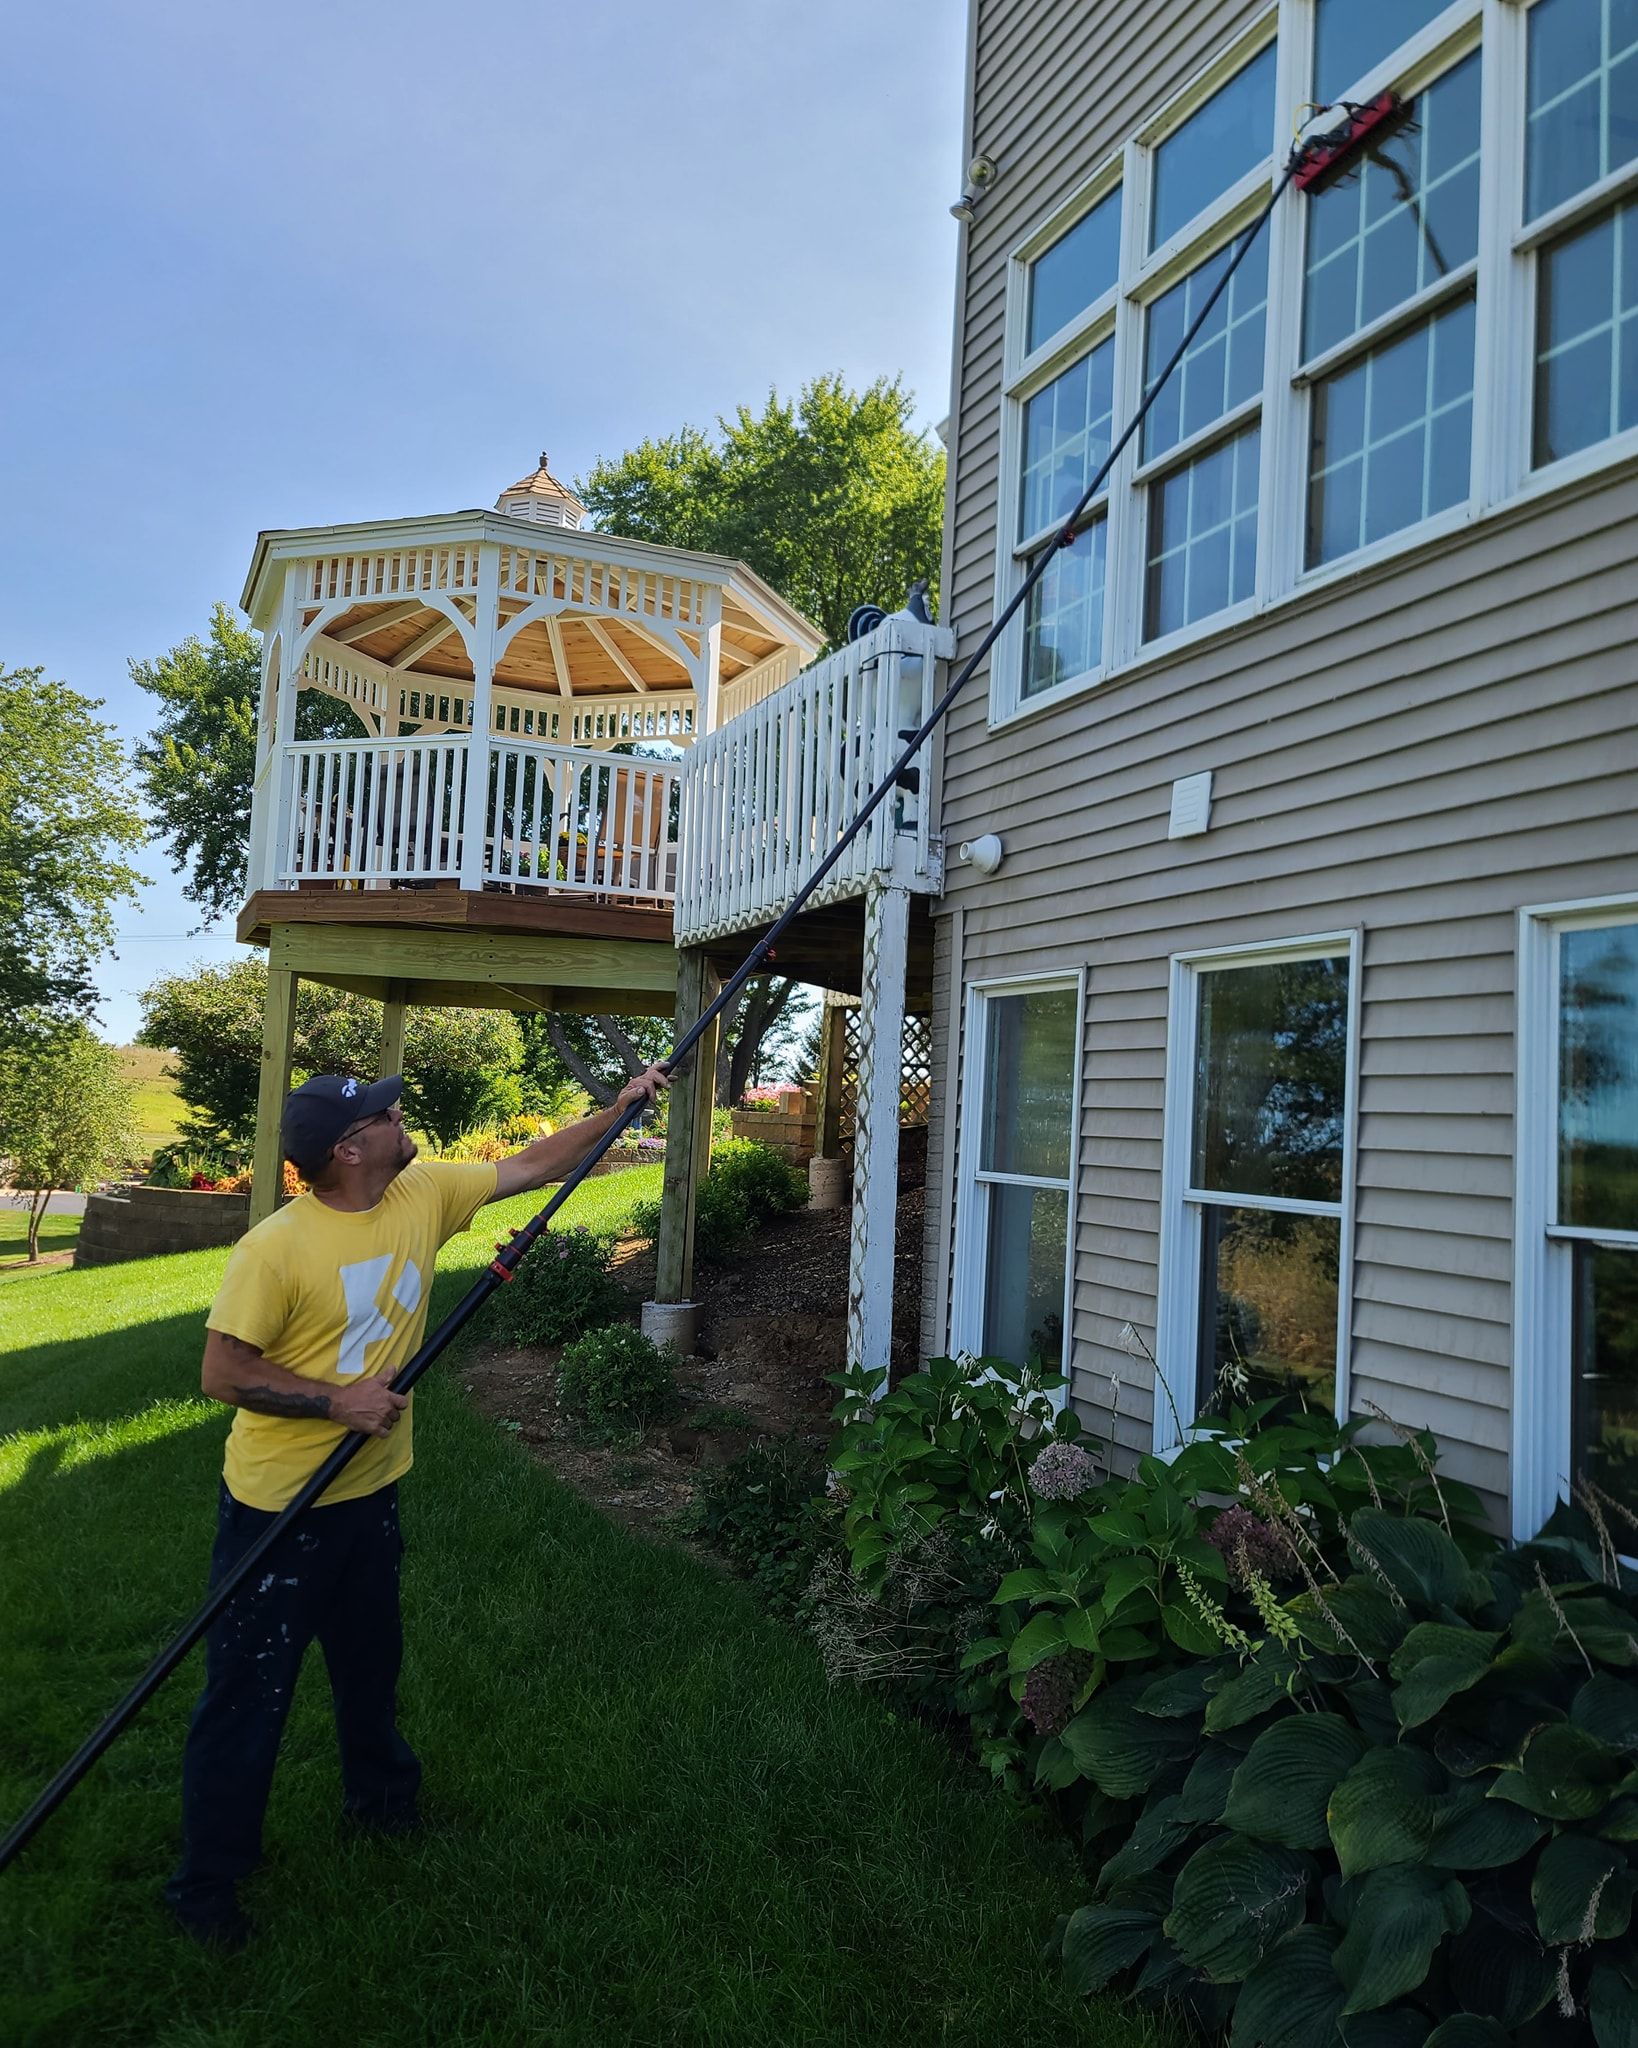 Interior and Exterior Window Cleaning for Paneless Window Cleaning LLC in Iowa City, IA